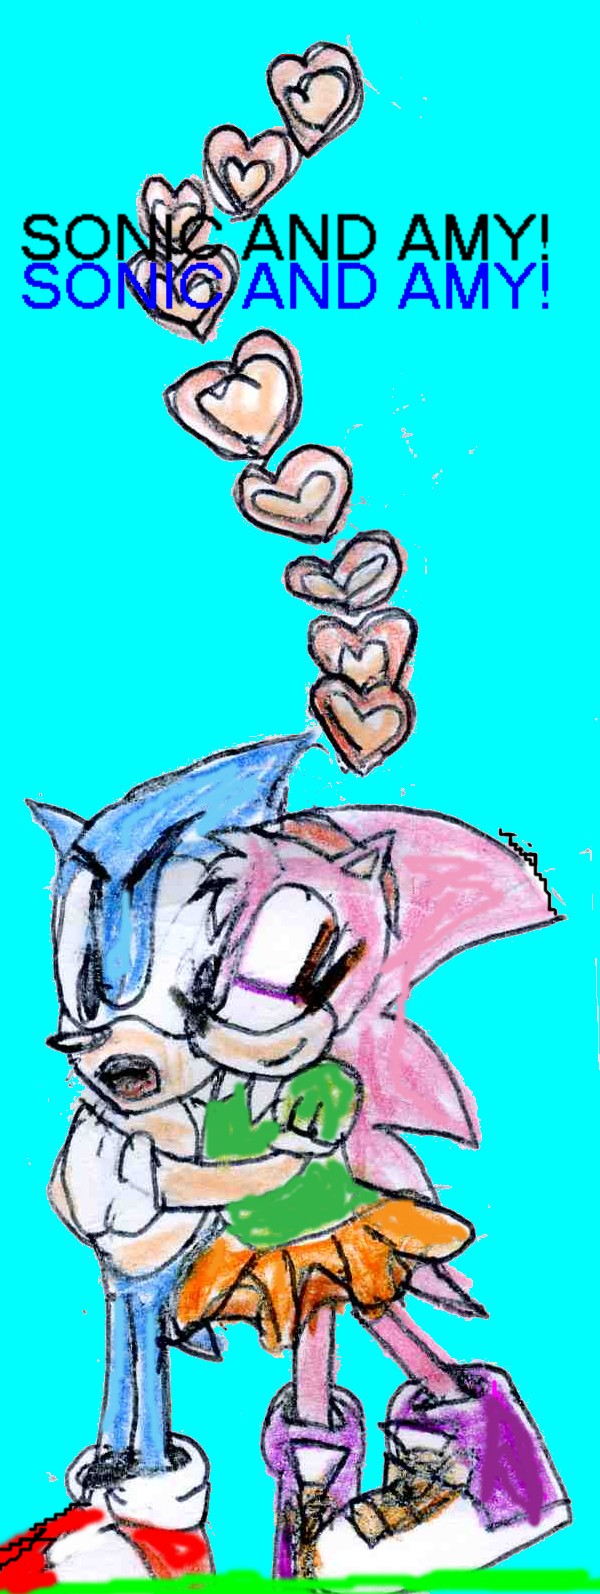 The original Sonic and Amy! (Sonic CD) by sabrinat14